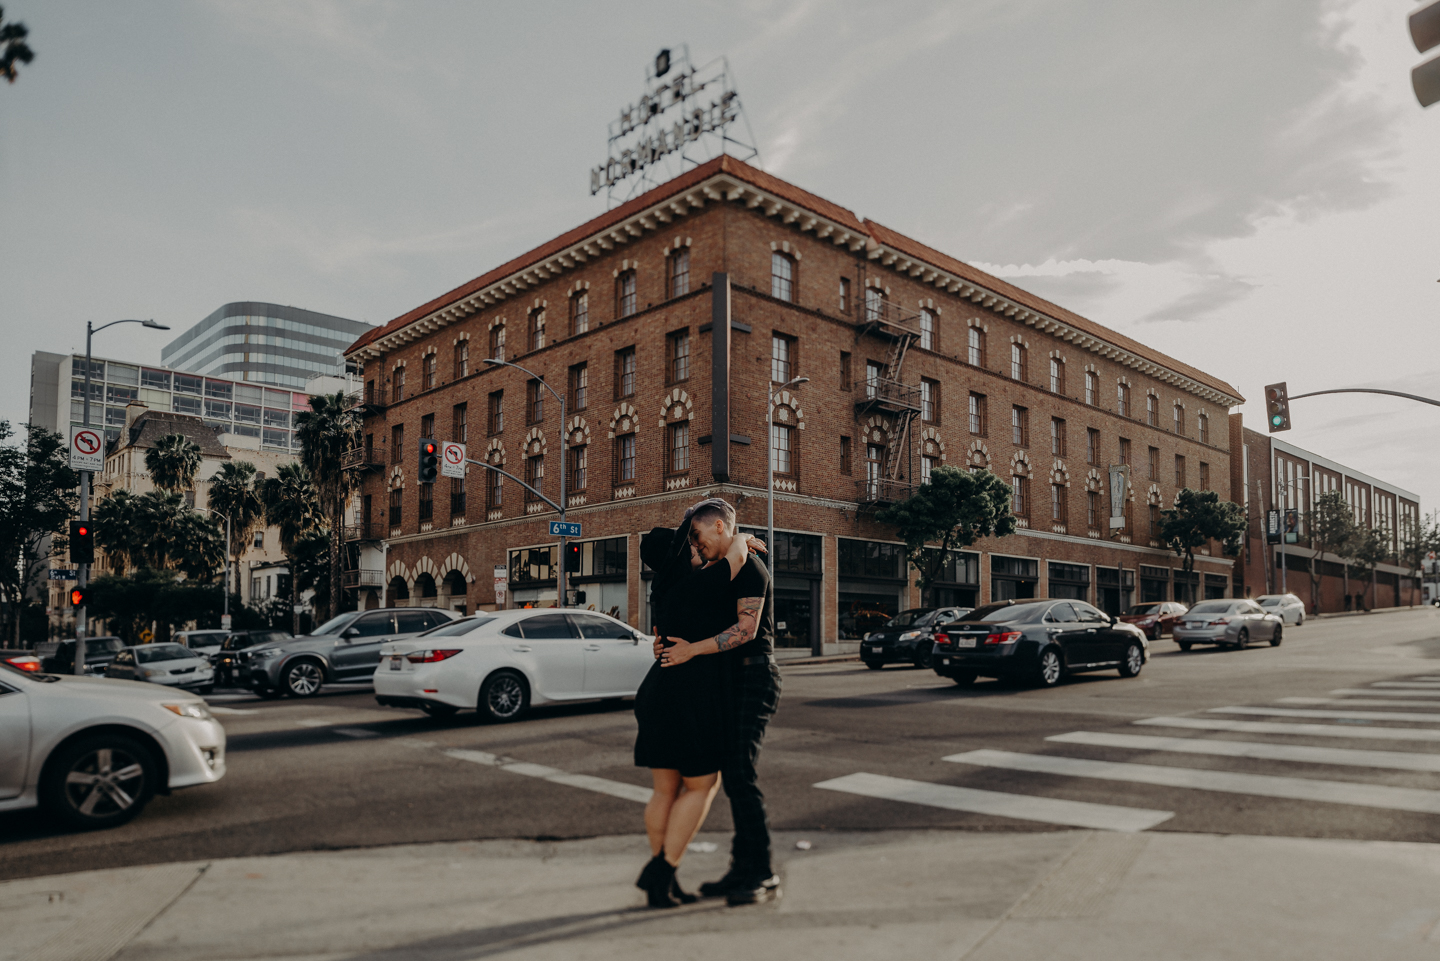 queer wedding photographer in los angeles - lesbian engagement session los angeles - isaiahandtaylor.com-009.jpg